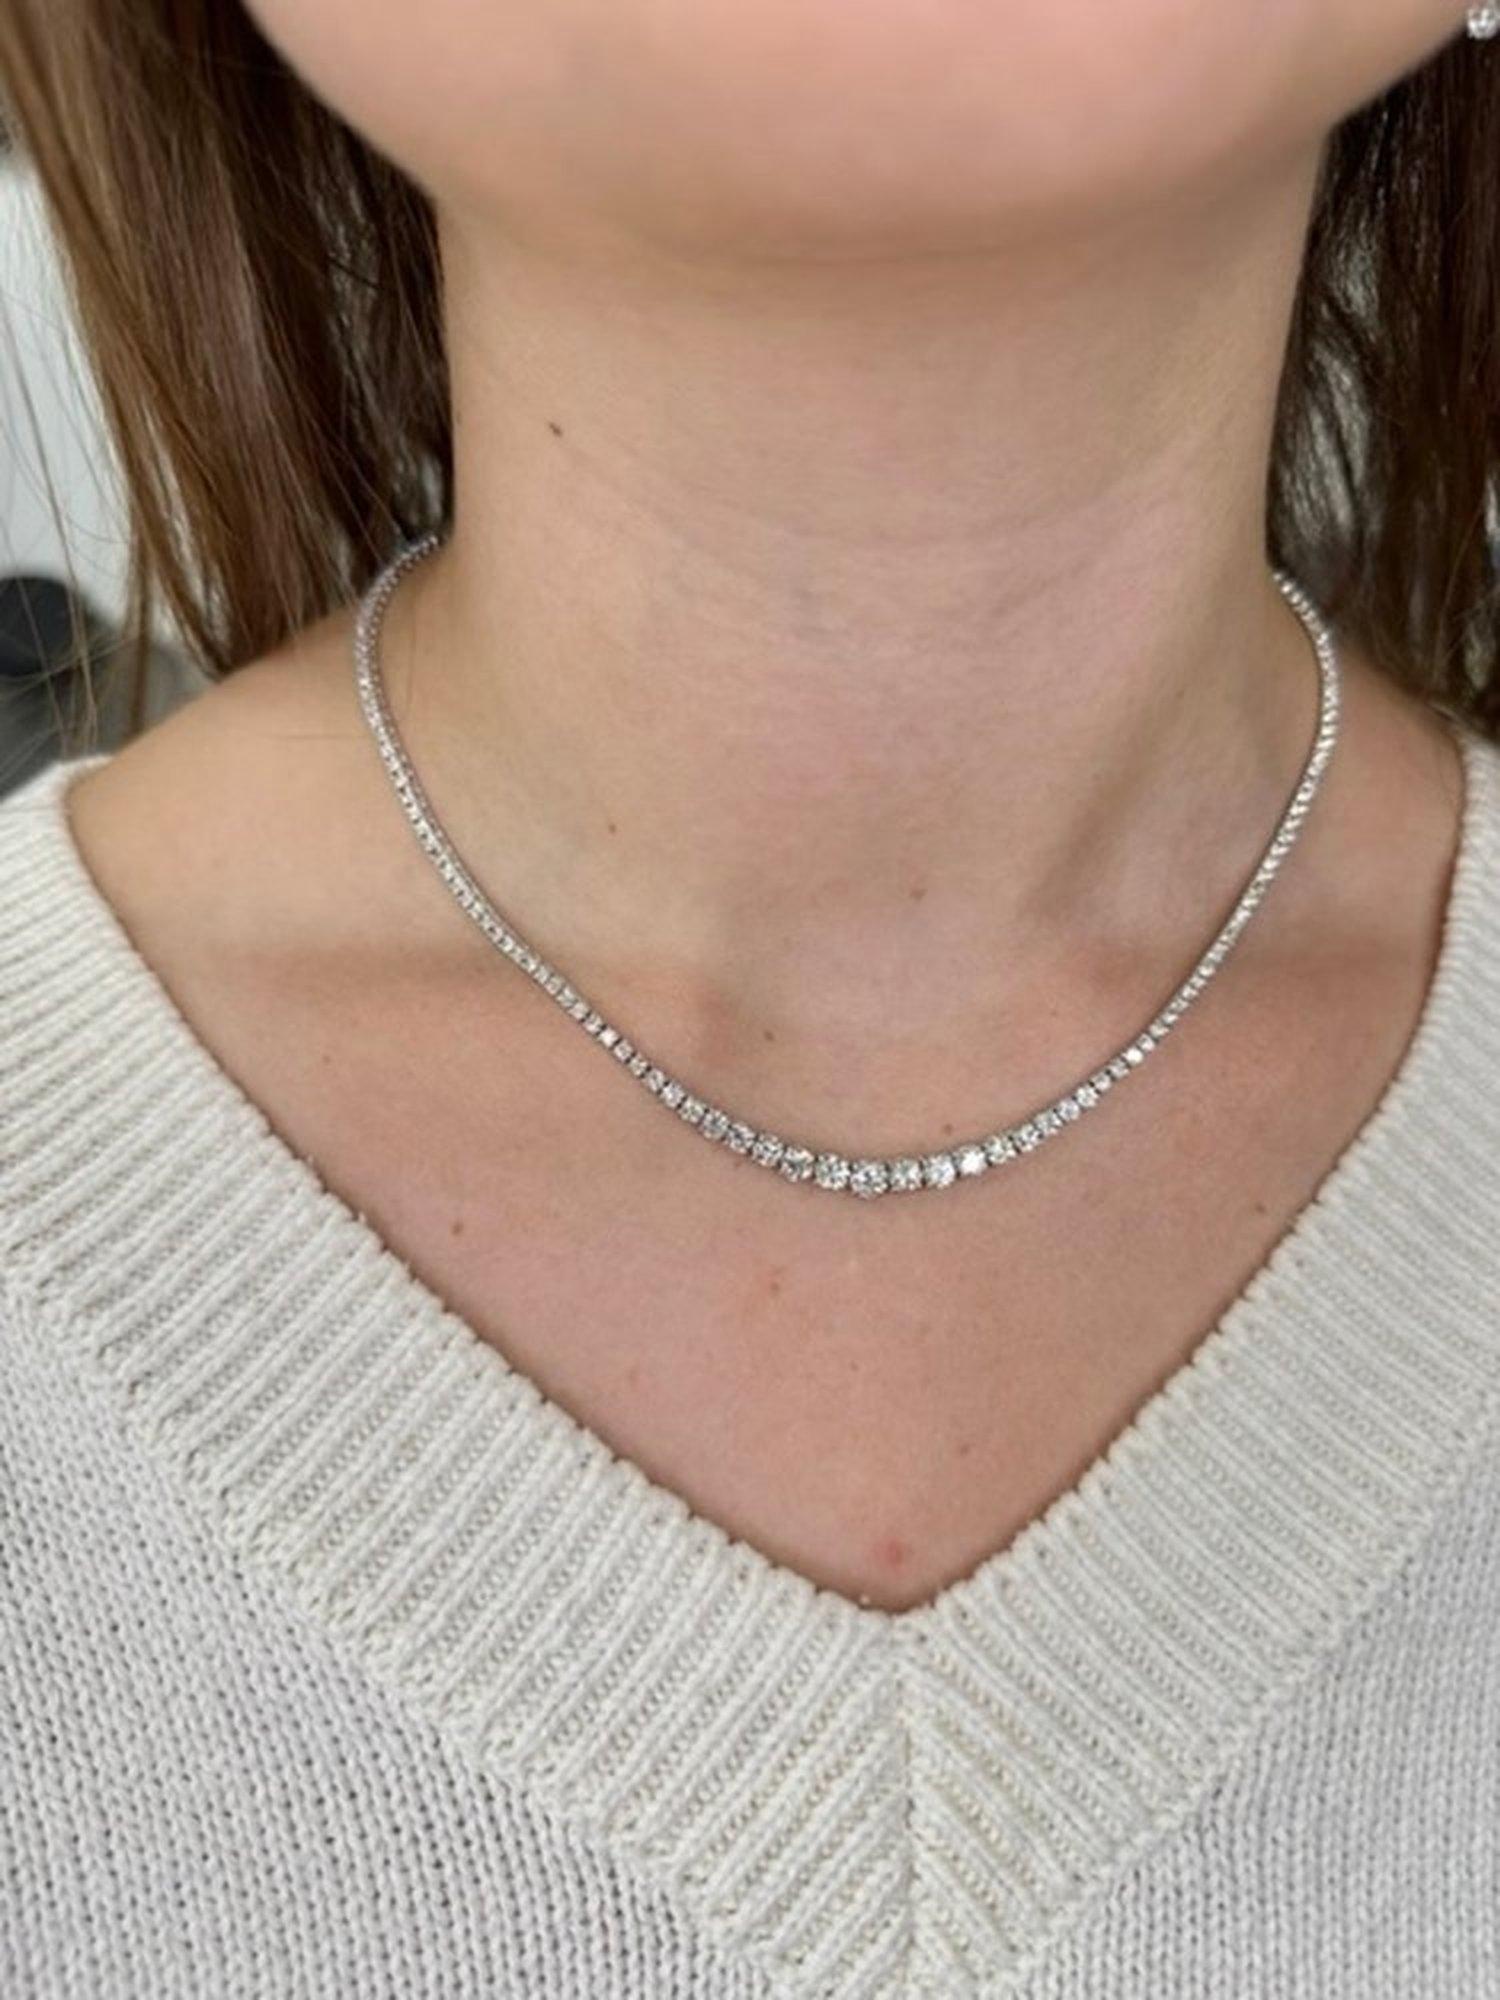 Treat yourself to the most impressive piece of jewelry with Gem Jewelers Co.'s 6.2 Carat Graduated Diamond Tennis Necklace in 14K White Gold.

Expertly crafted by skilled jewelers, this luxurious piece is a true masterpiece of fine jewelry. The